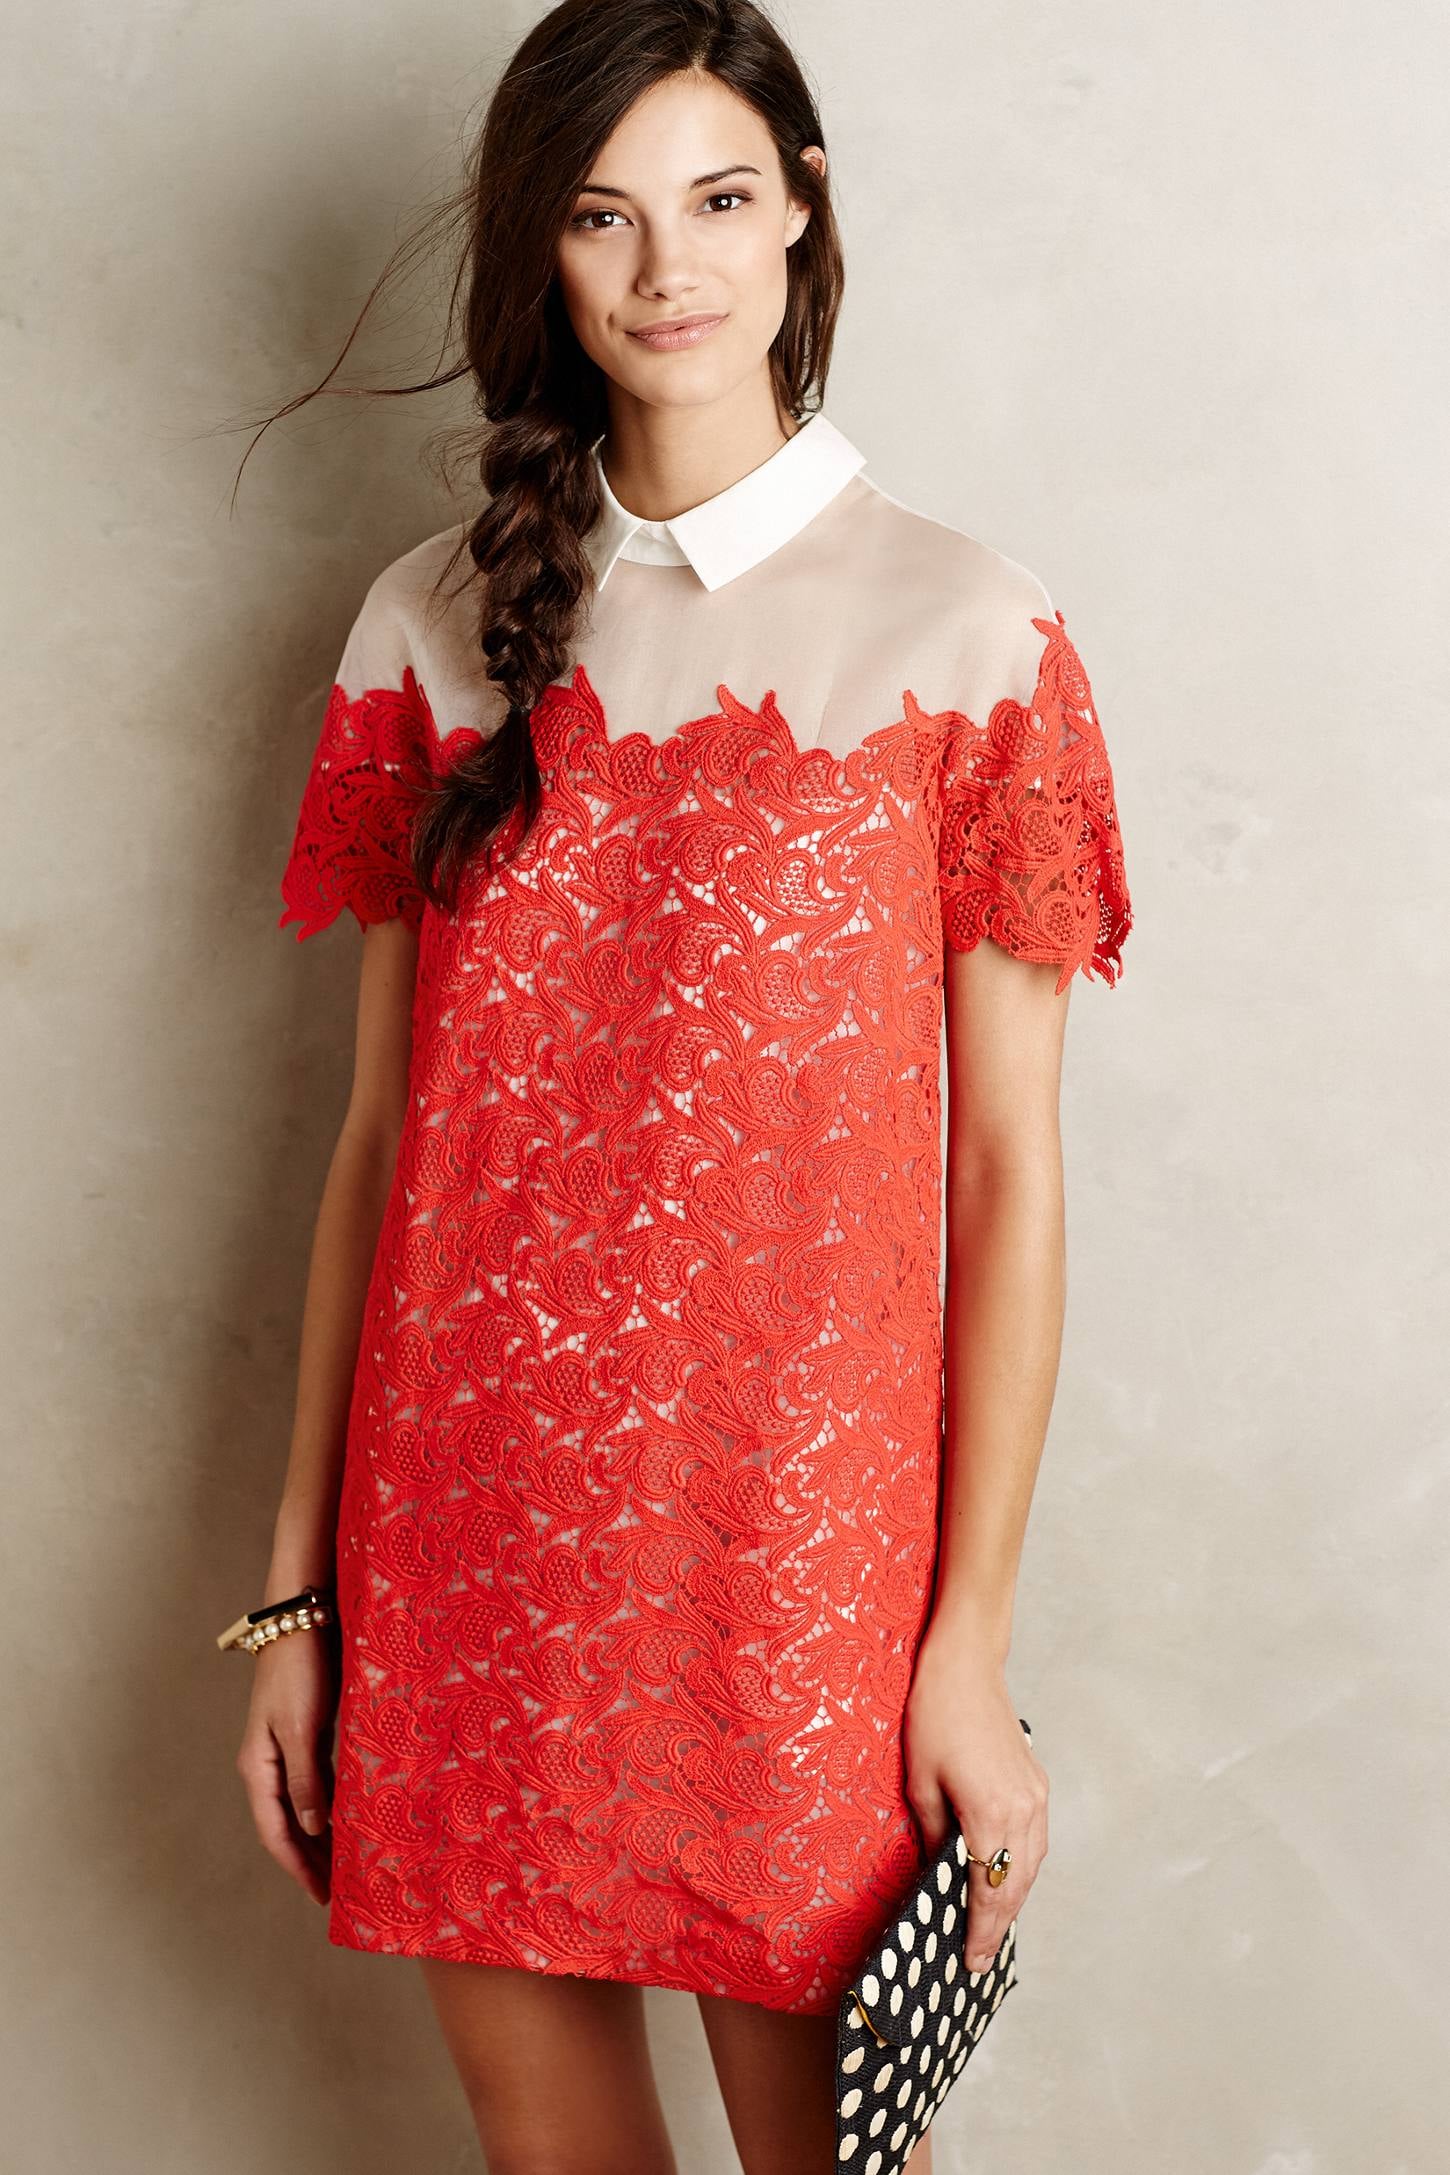 browser vacature Reclame Paul & Joe Sister Lillan Lace Shift ($295) | 26 Flawless Dresses For Your  End-of-Summer Party Plans | POPSUGAR Fashion Photo 5